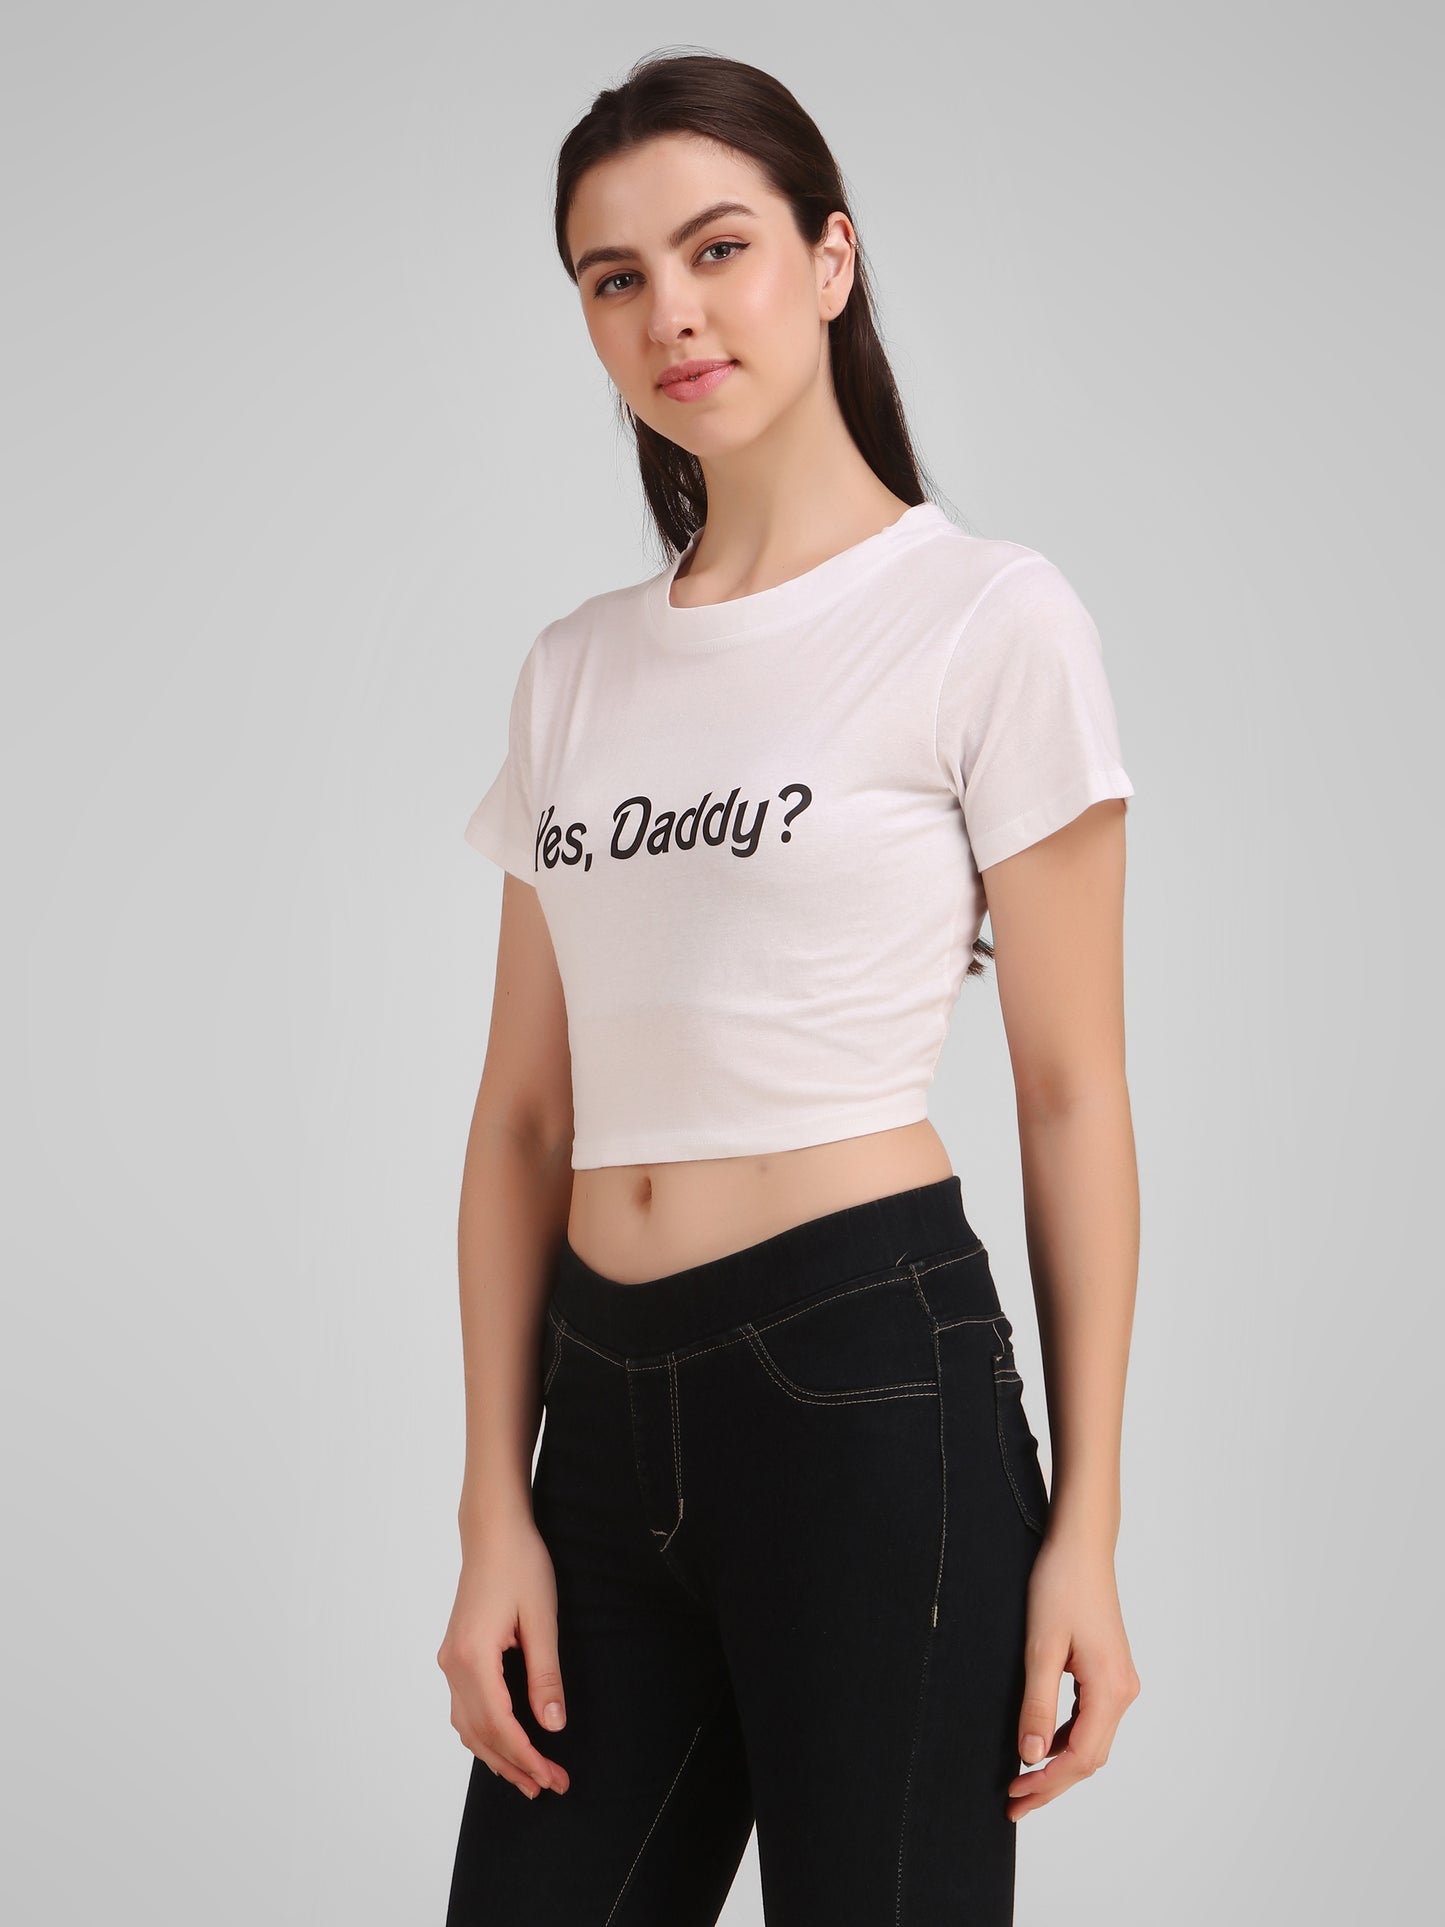 Peach Dog & White Yes Daddy Print Combo(2 Tops) Crop Tops!!